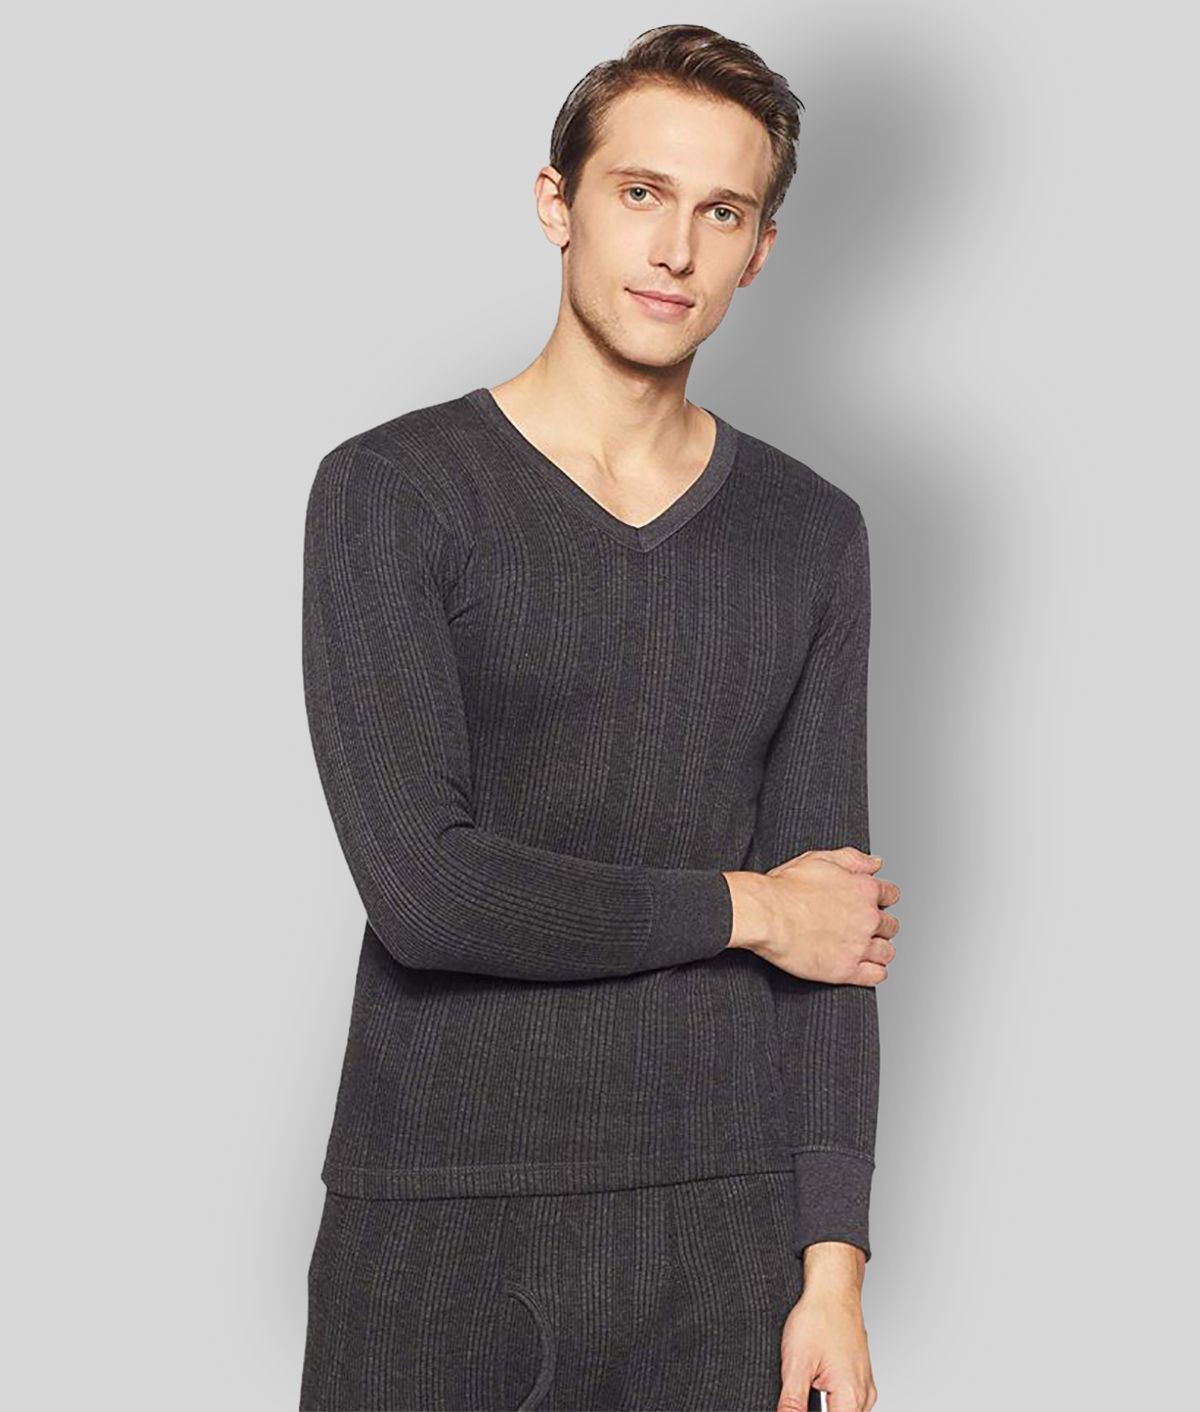     			Dixcy Scott - Charcoal Cotton Men's Thermal Tops ( Pack of 1 )